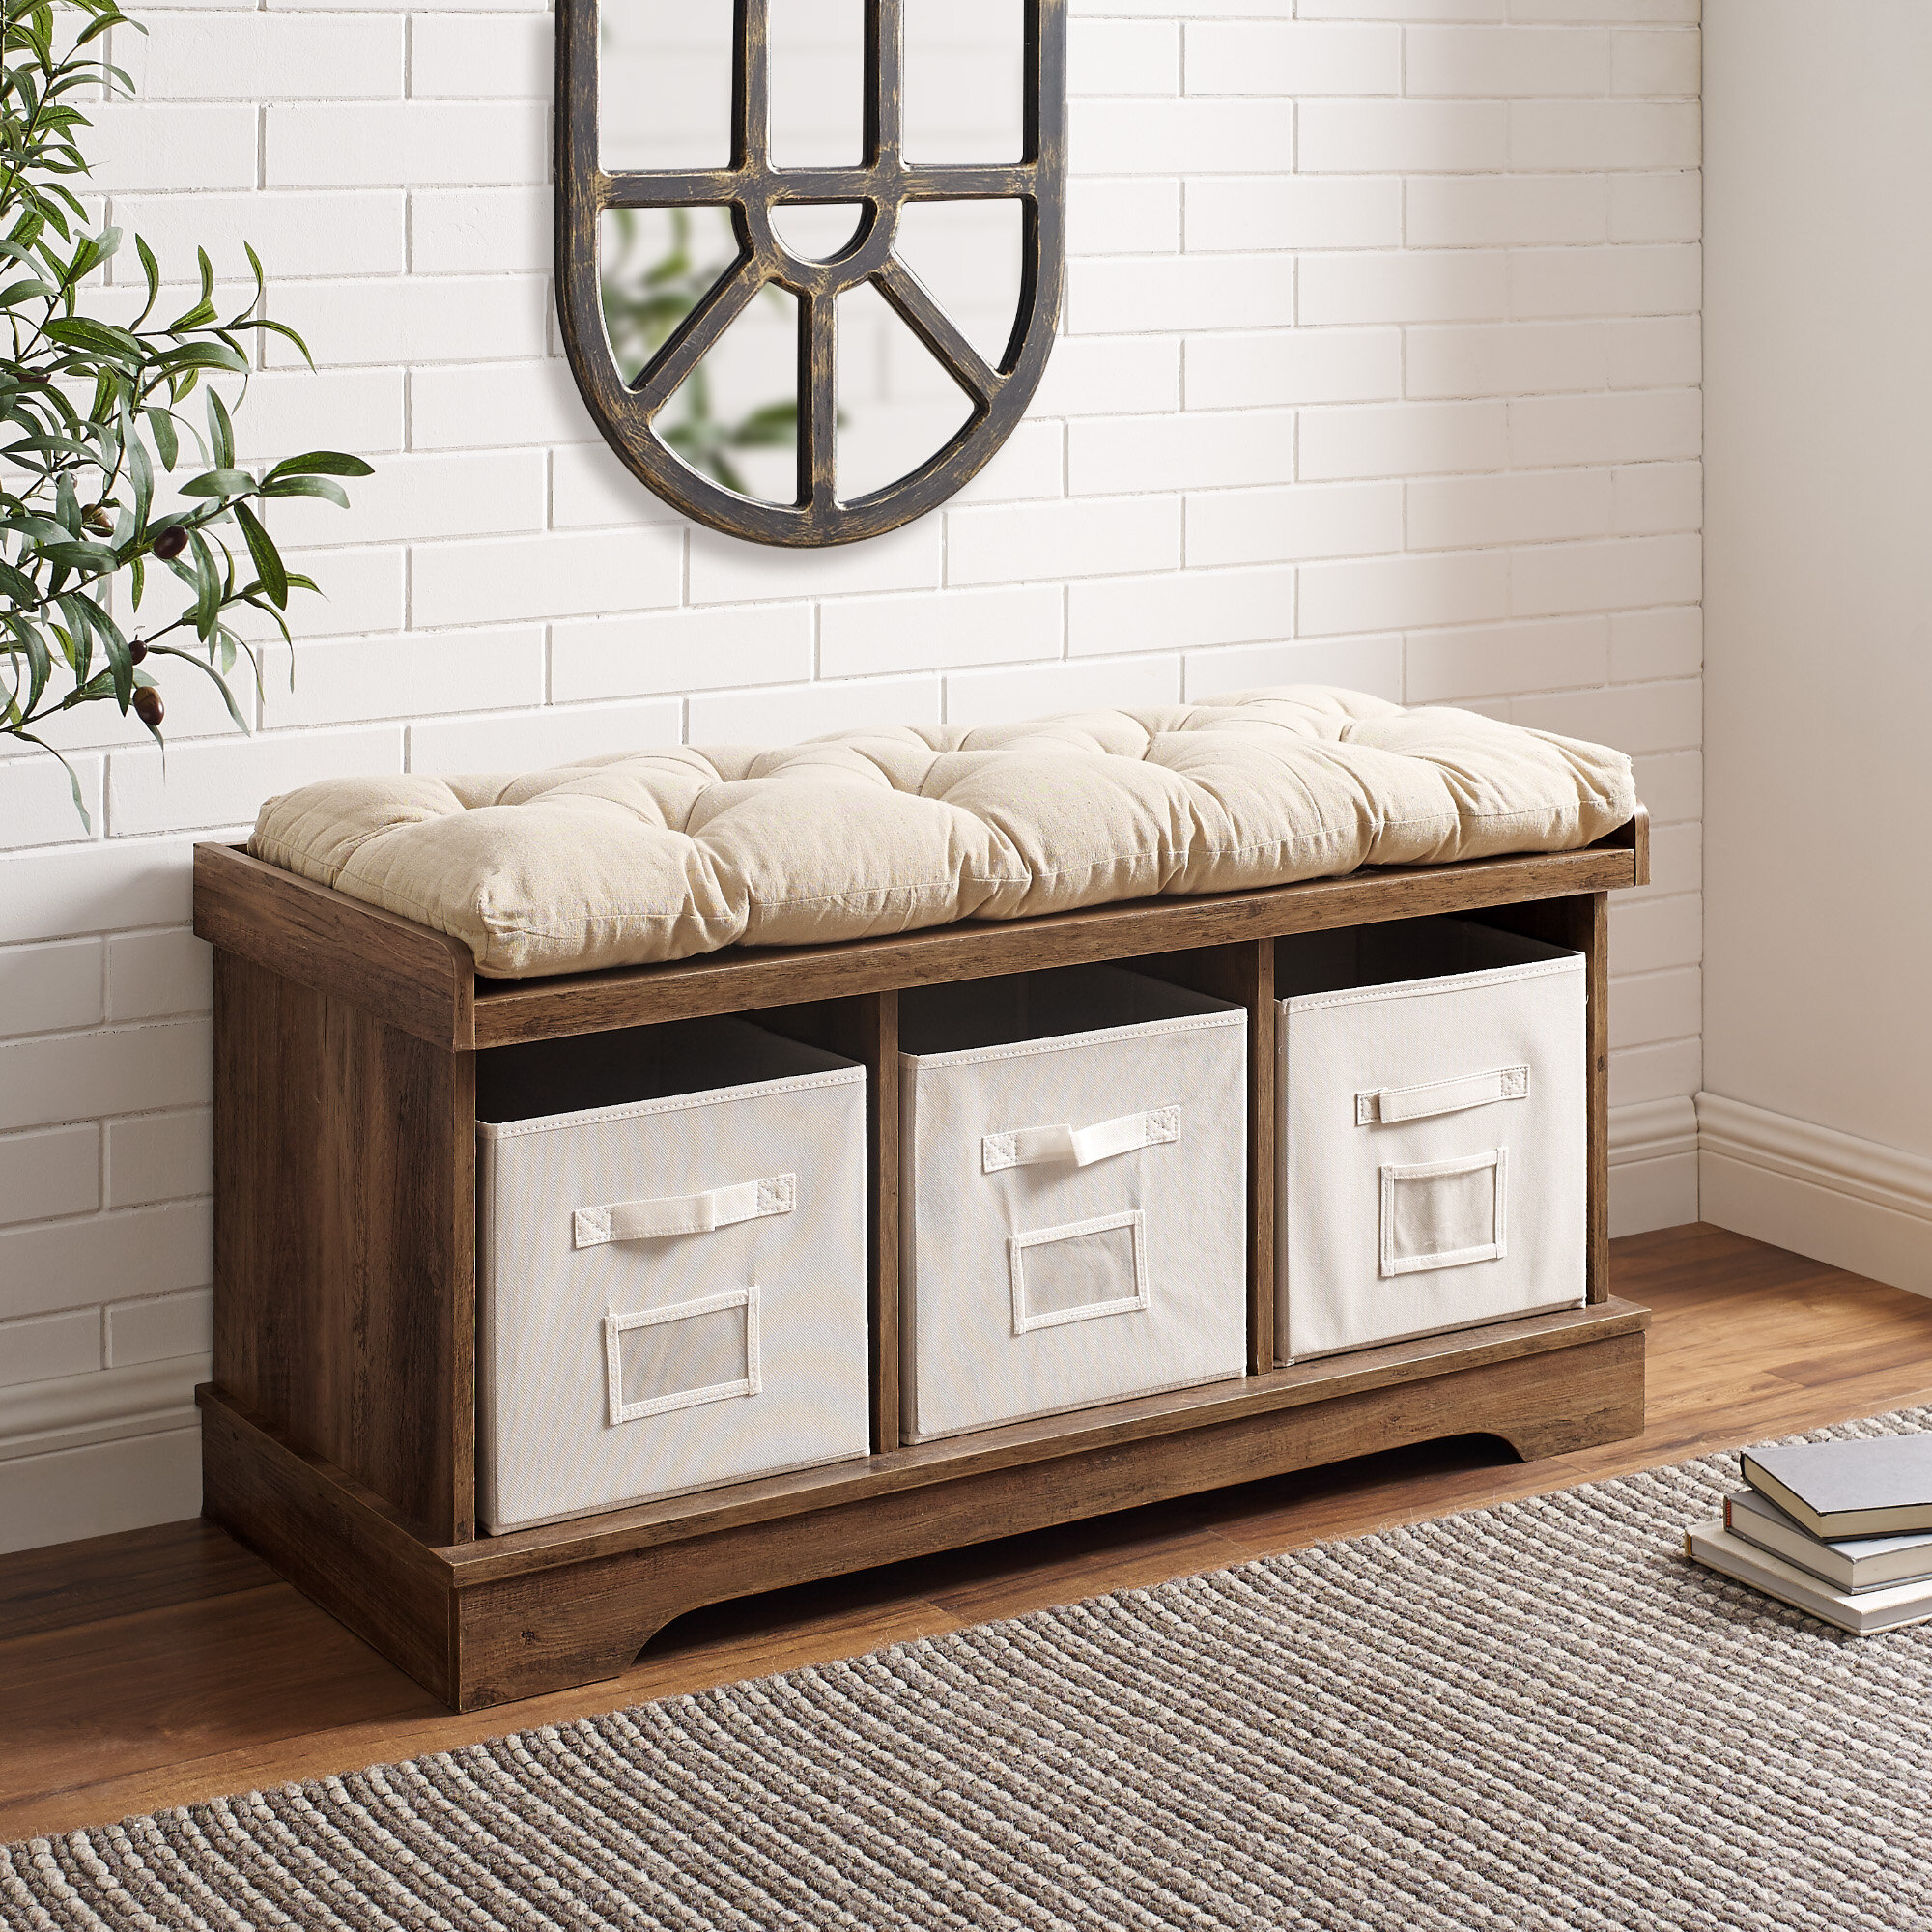 Furniture of America Tantly 3 Drawer Storage Bench in Oak 